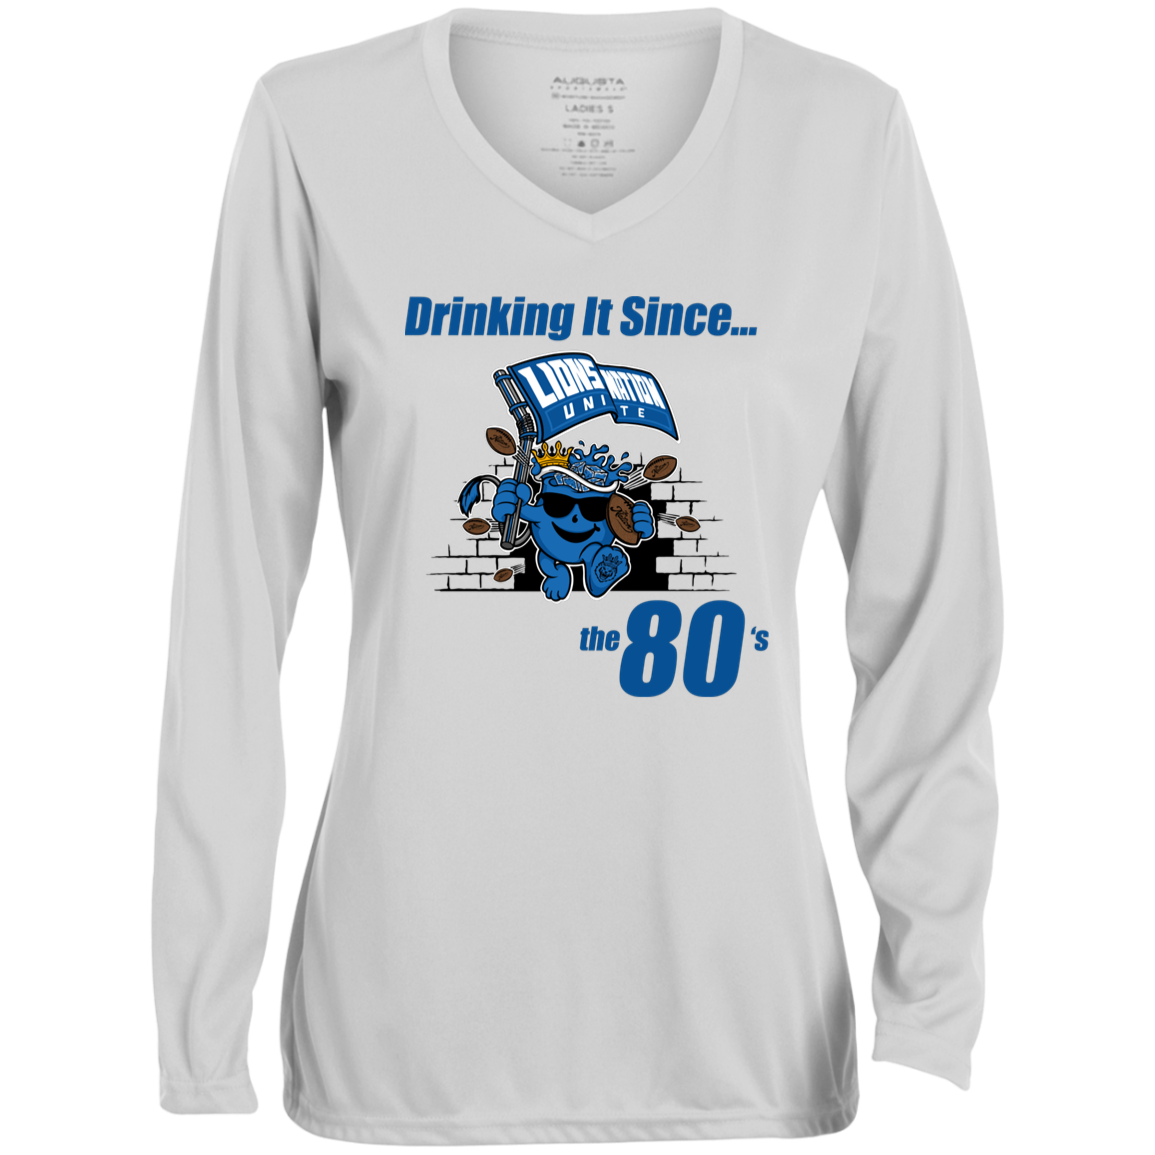 Drinking It Since the 80's Women's Long-Sleeved T-Shirt